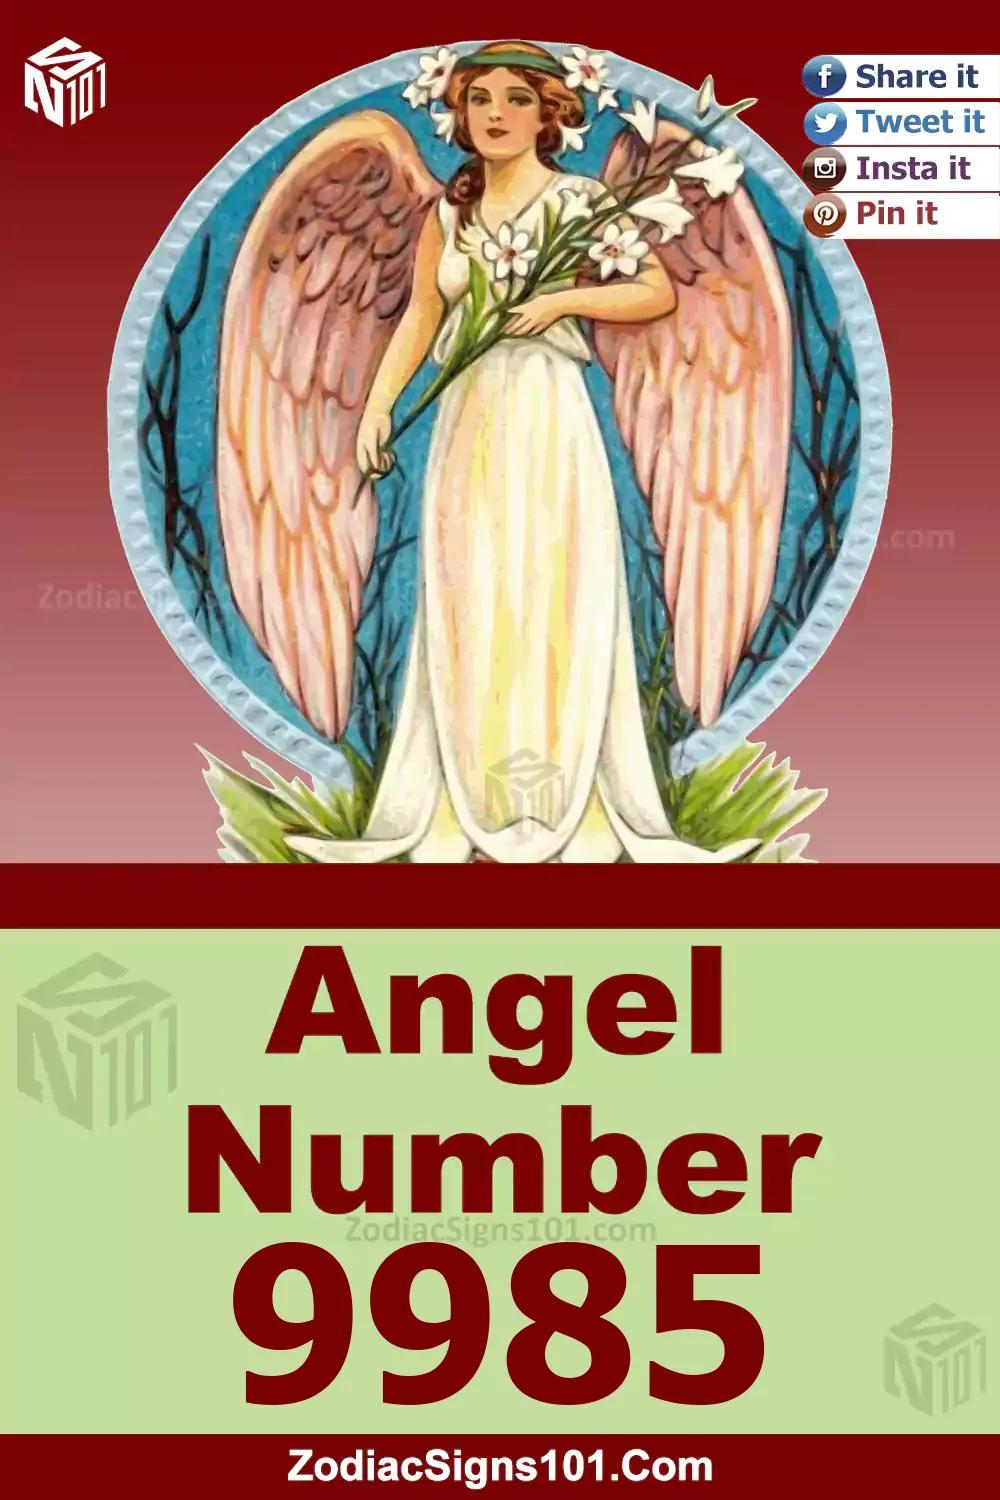 9985 Angel Number Meaning